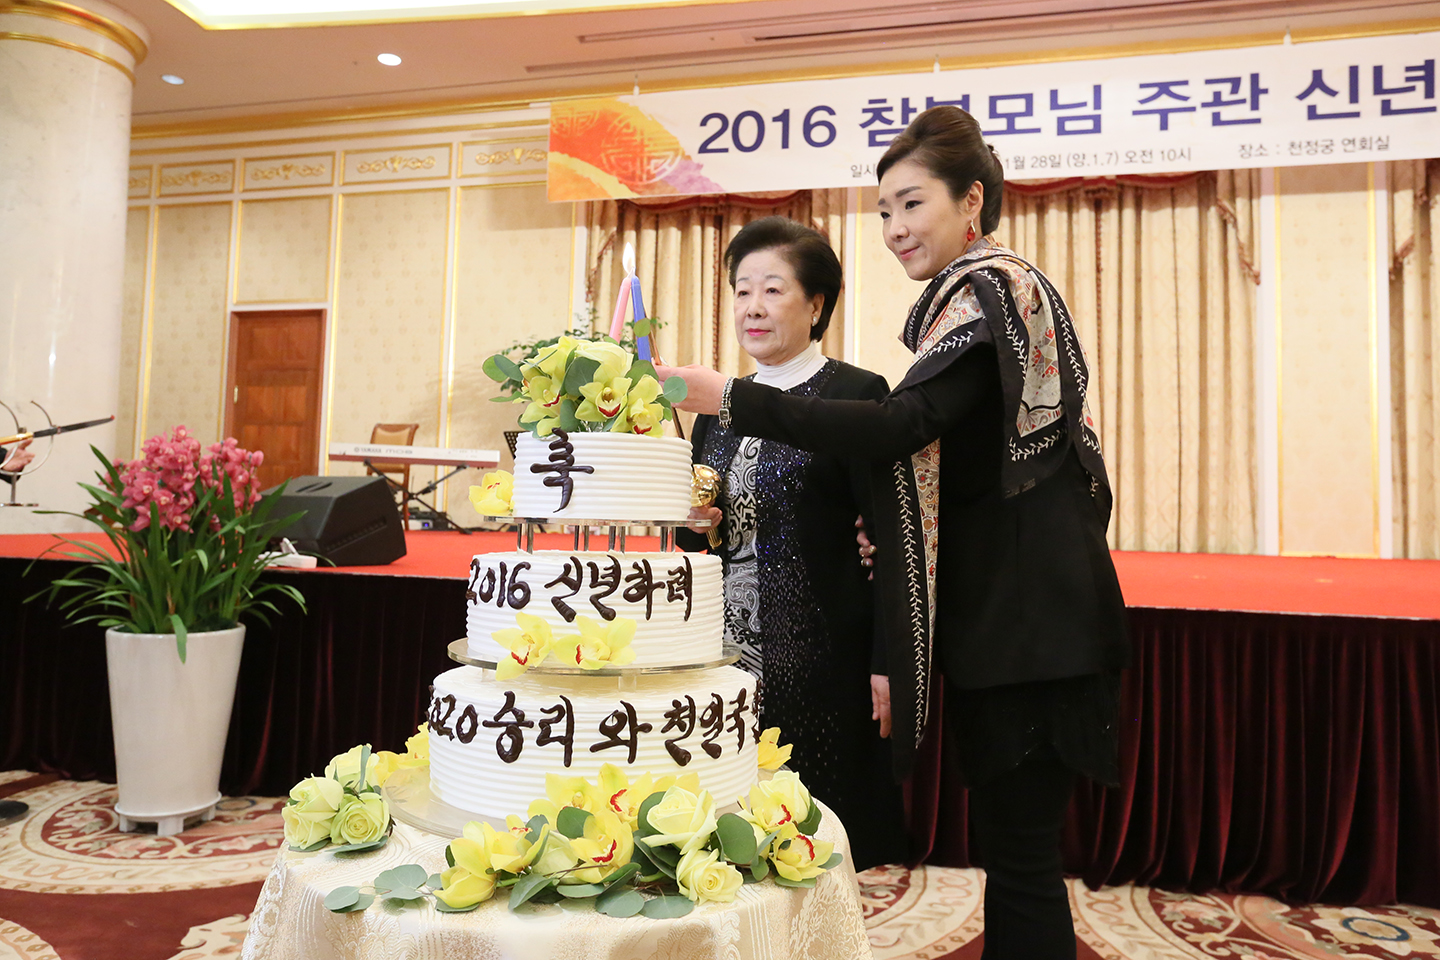 Gathering with True Parents to Celebrate the Start of 2016 (January 7, 2016)Cheon Jeong Gung